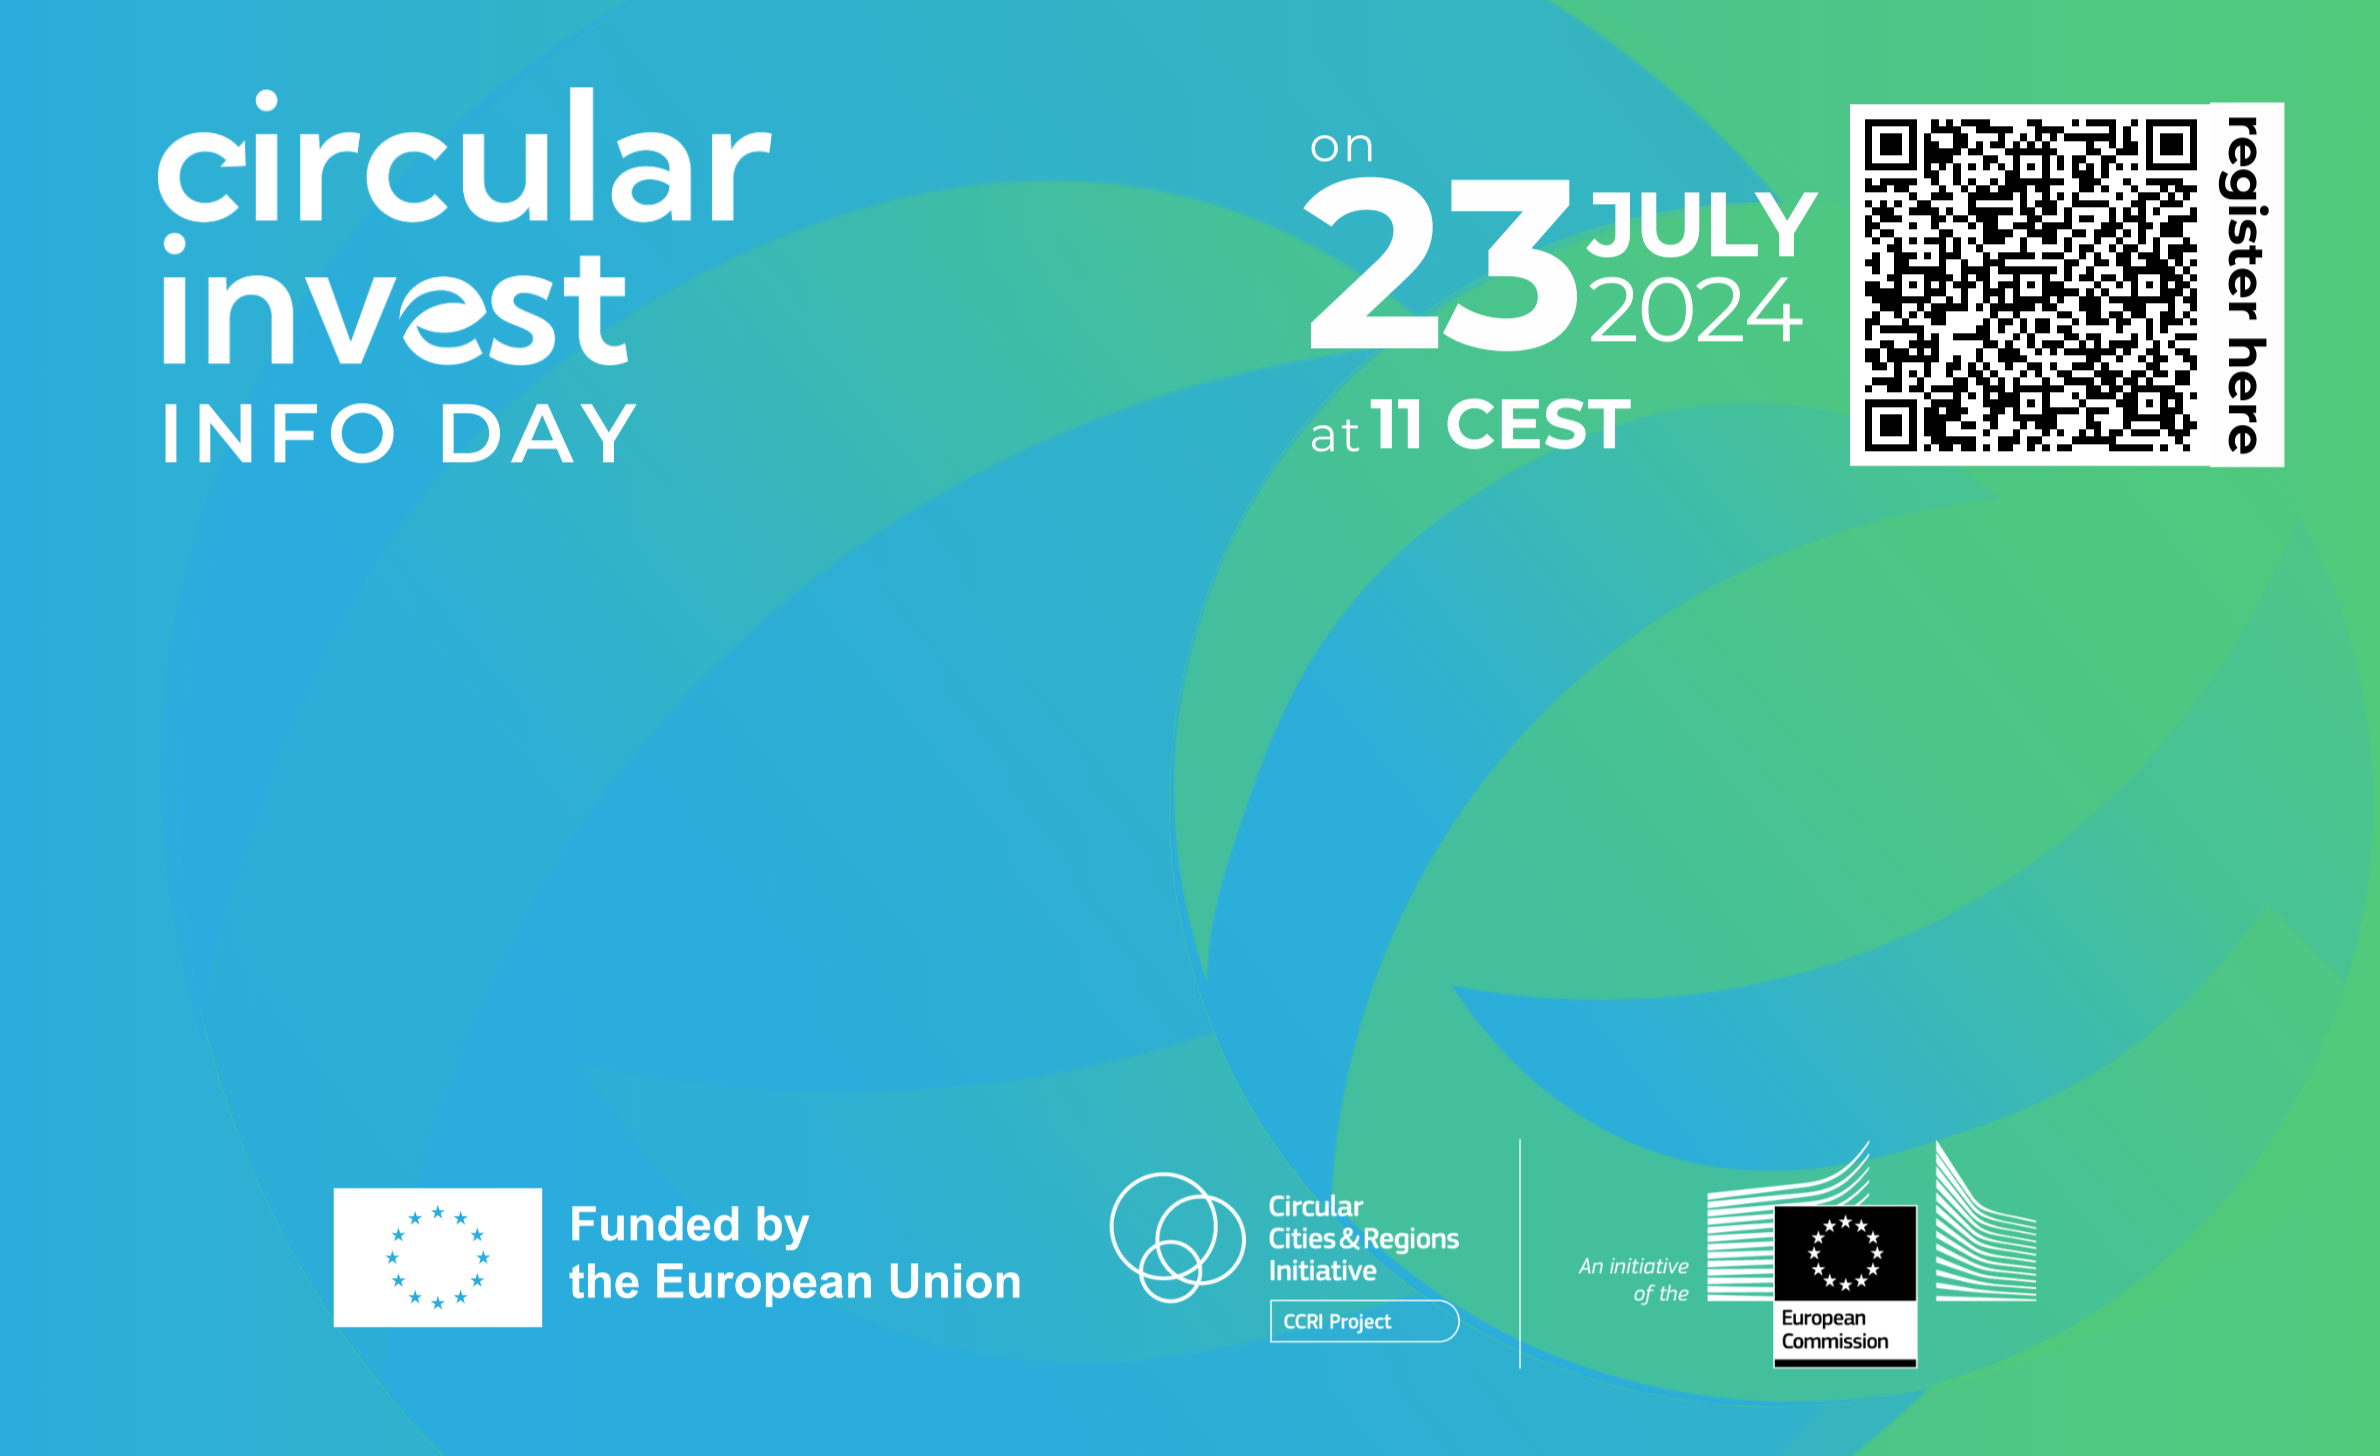 CircularInvest infoday 23 July 2024: make your Circular Economy project investment-ready